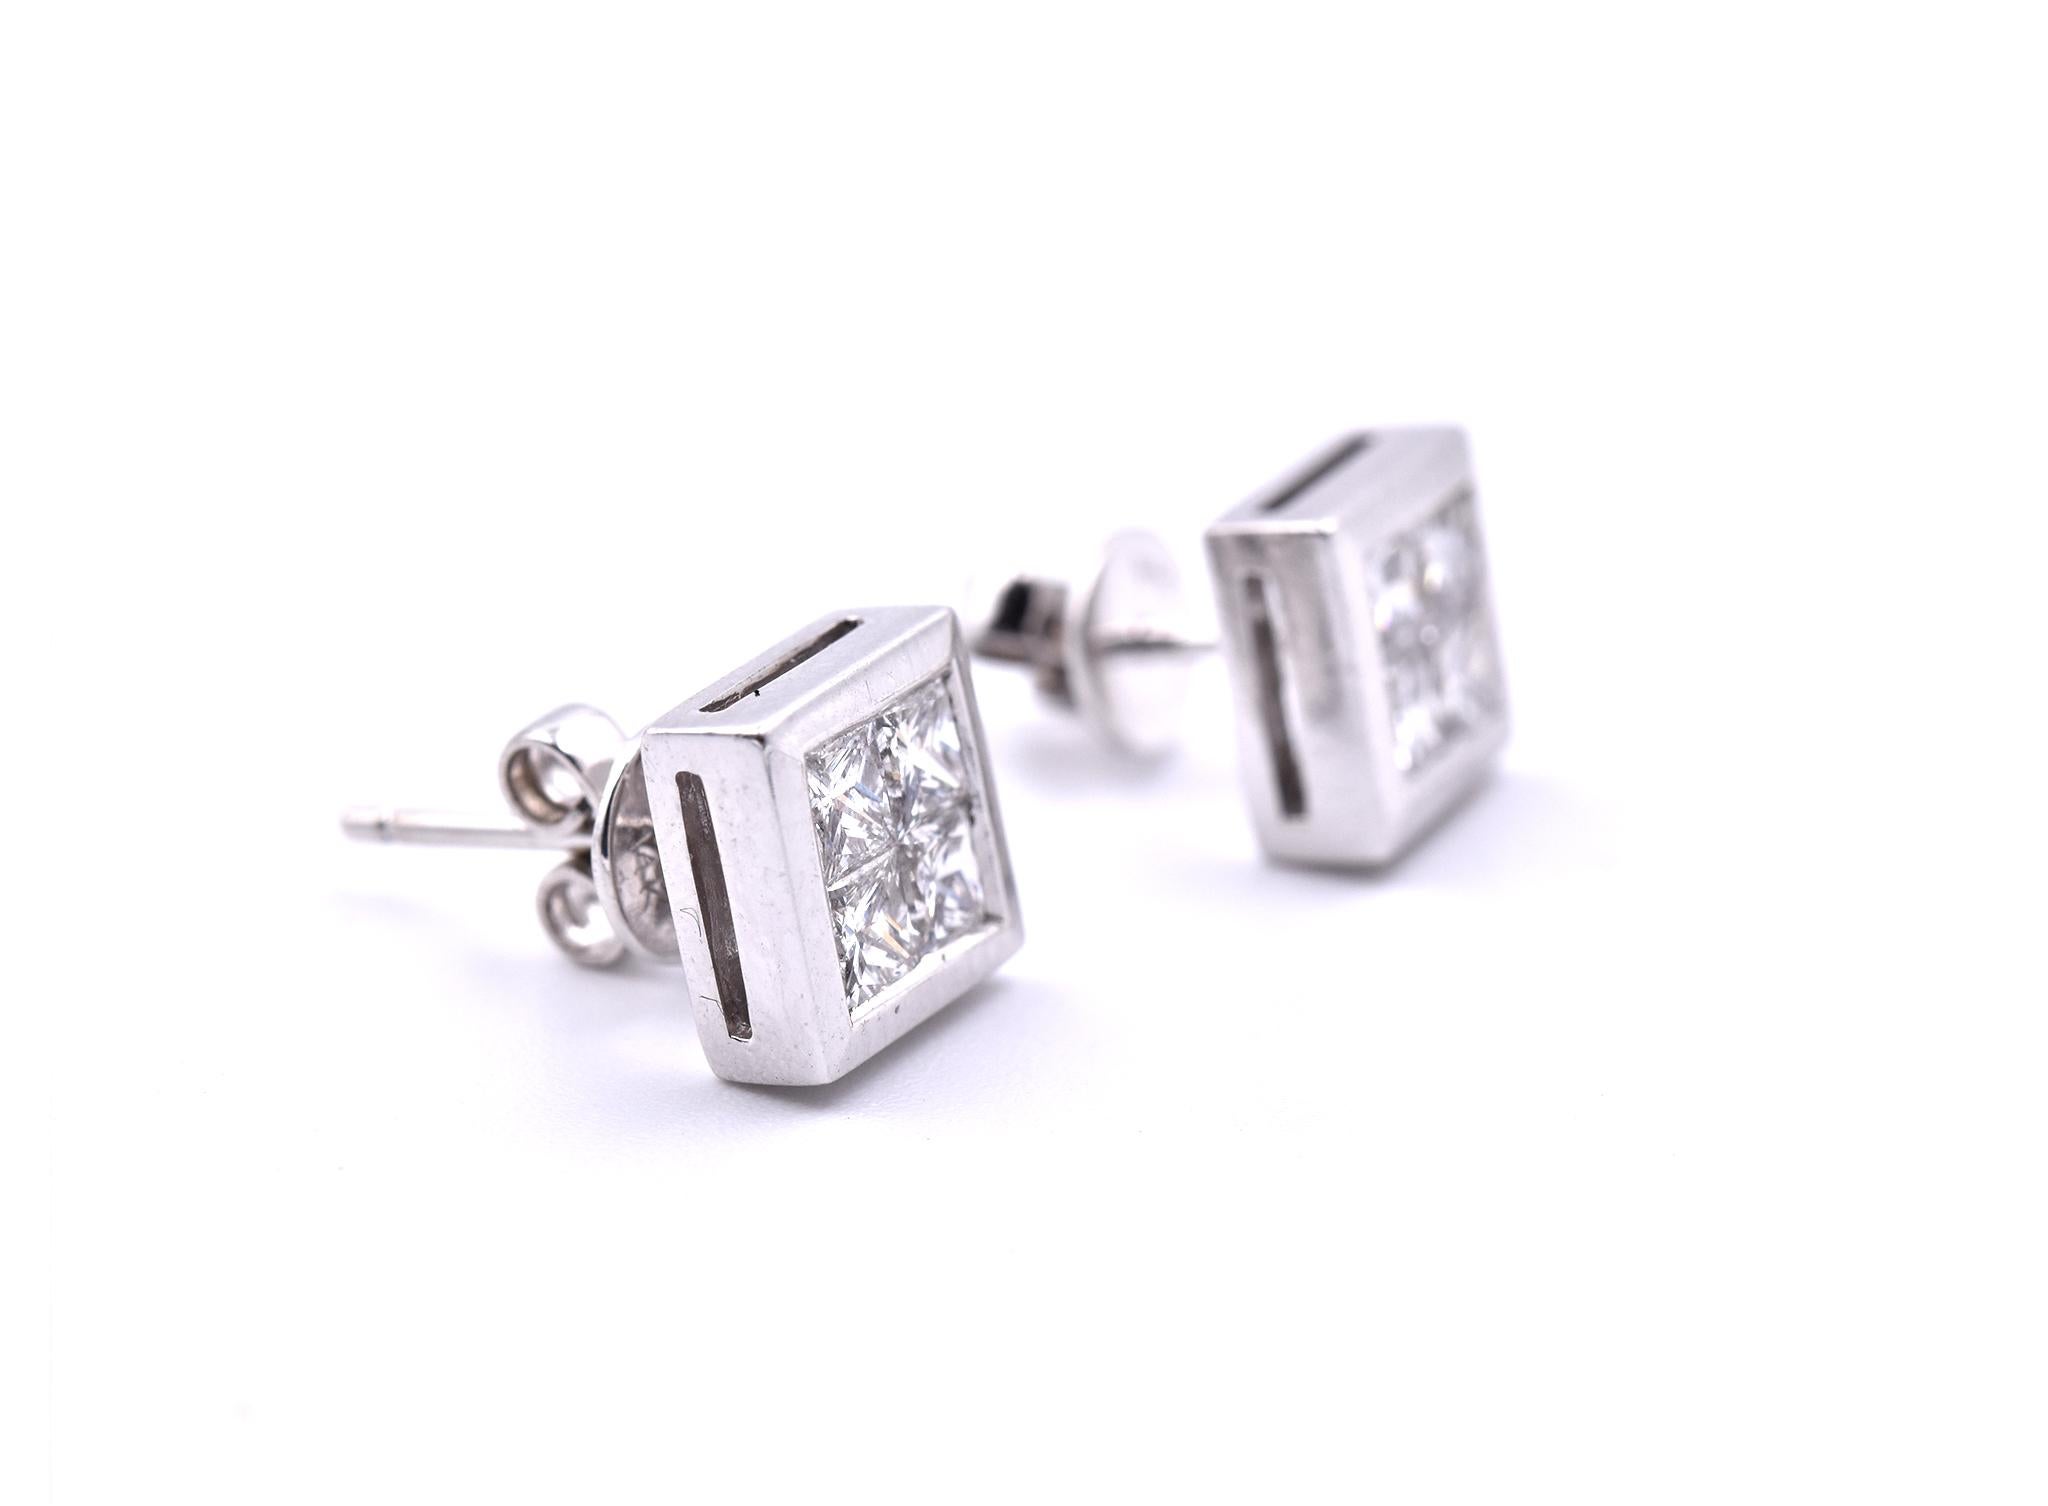 Designer: custom design
Material: 14k white gold
Diamonds: 8 princess cut = 1.00cttw
Color: G
Clarity: VS
Dimensions: earrings are approximately 7.50mm by 7.50mm
Fastenings: post 
Weight: 3.08 grams
